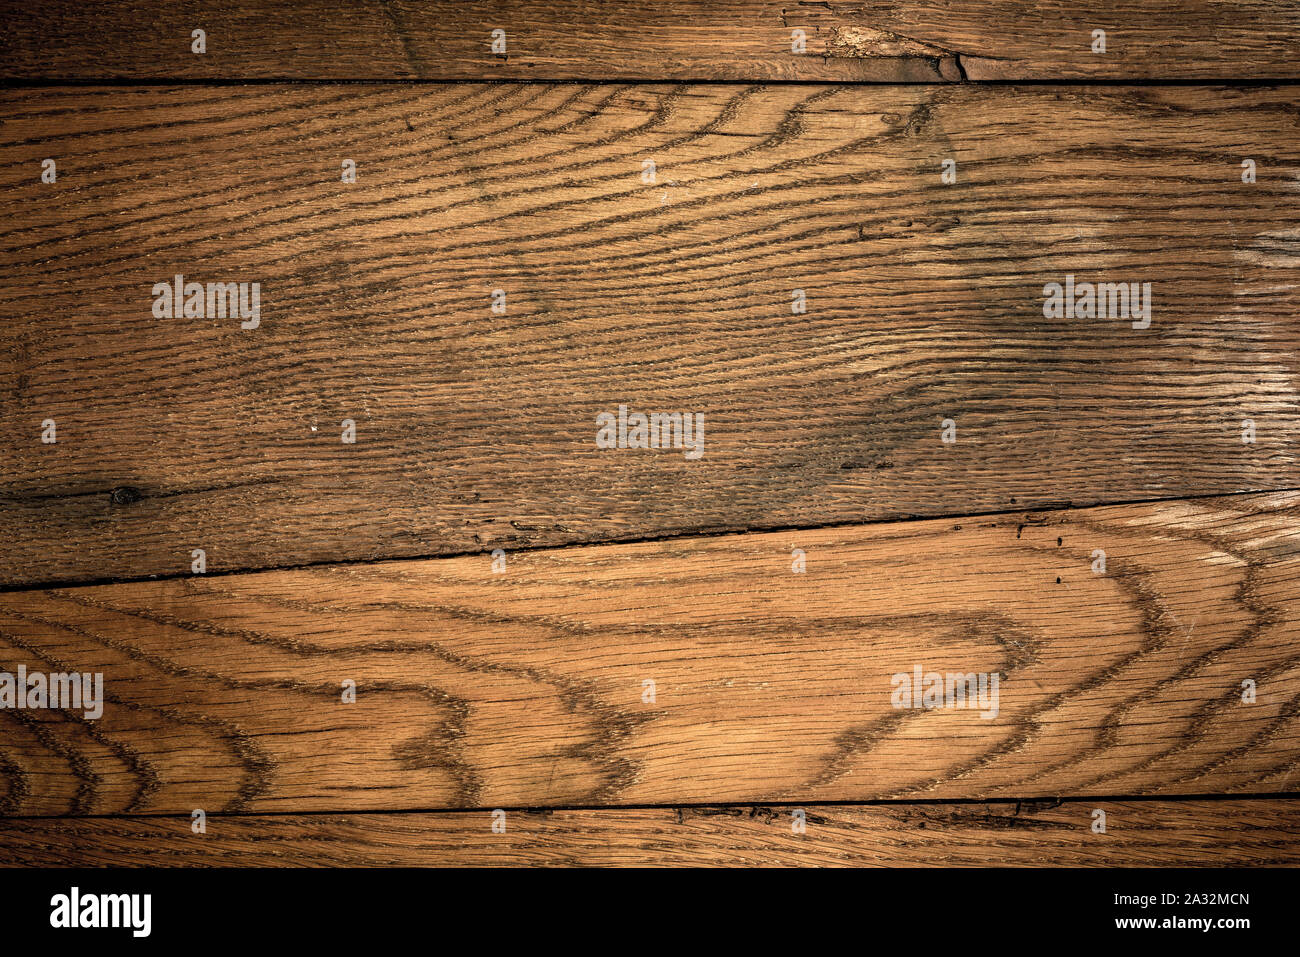 Rustic wood planks background Stock Photo